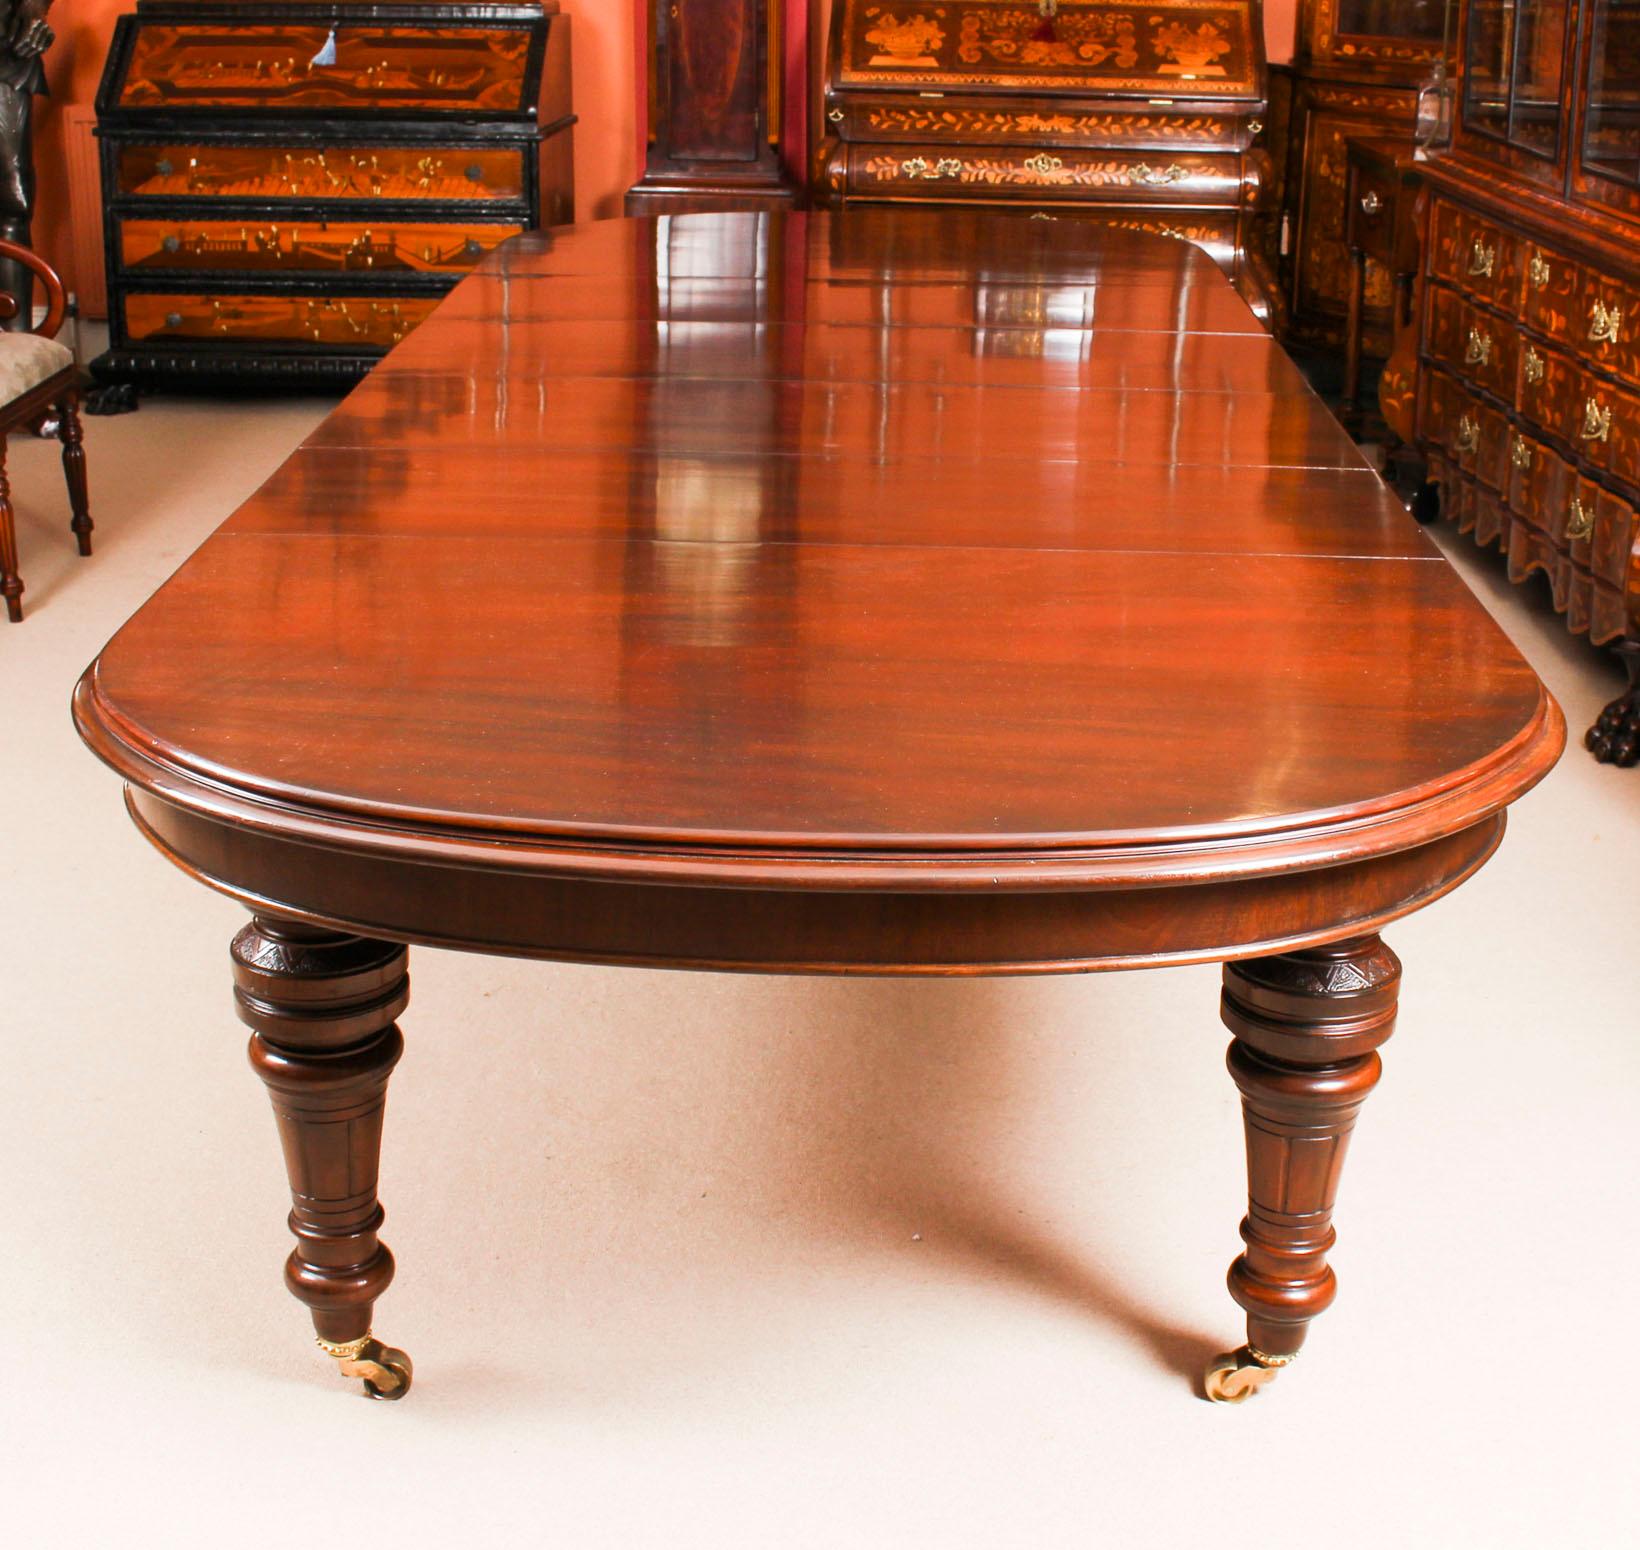 This is a fantastic antique Victorian solid mahogany D-end dining table which can seat ten diners in comfort, circa 1870 in date.
 
This beautiful table is in stunning flame mahogany and has four leaves of approximately 45 cm each, which can be